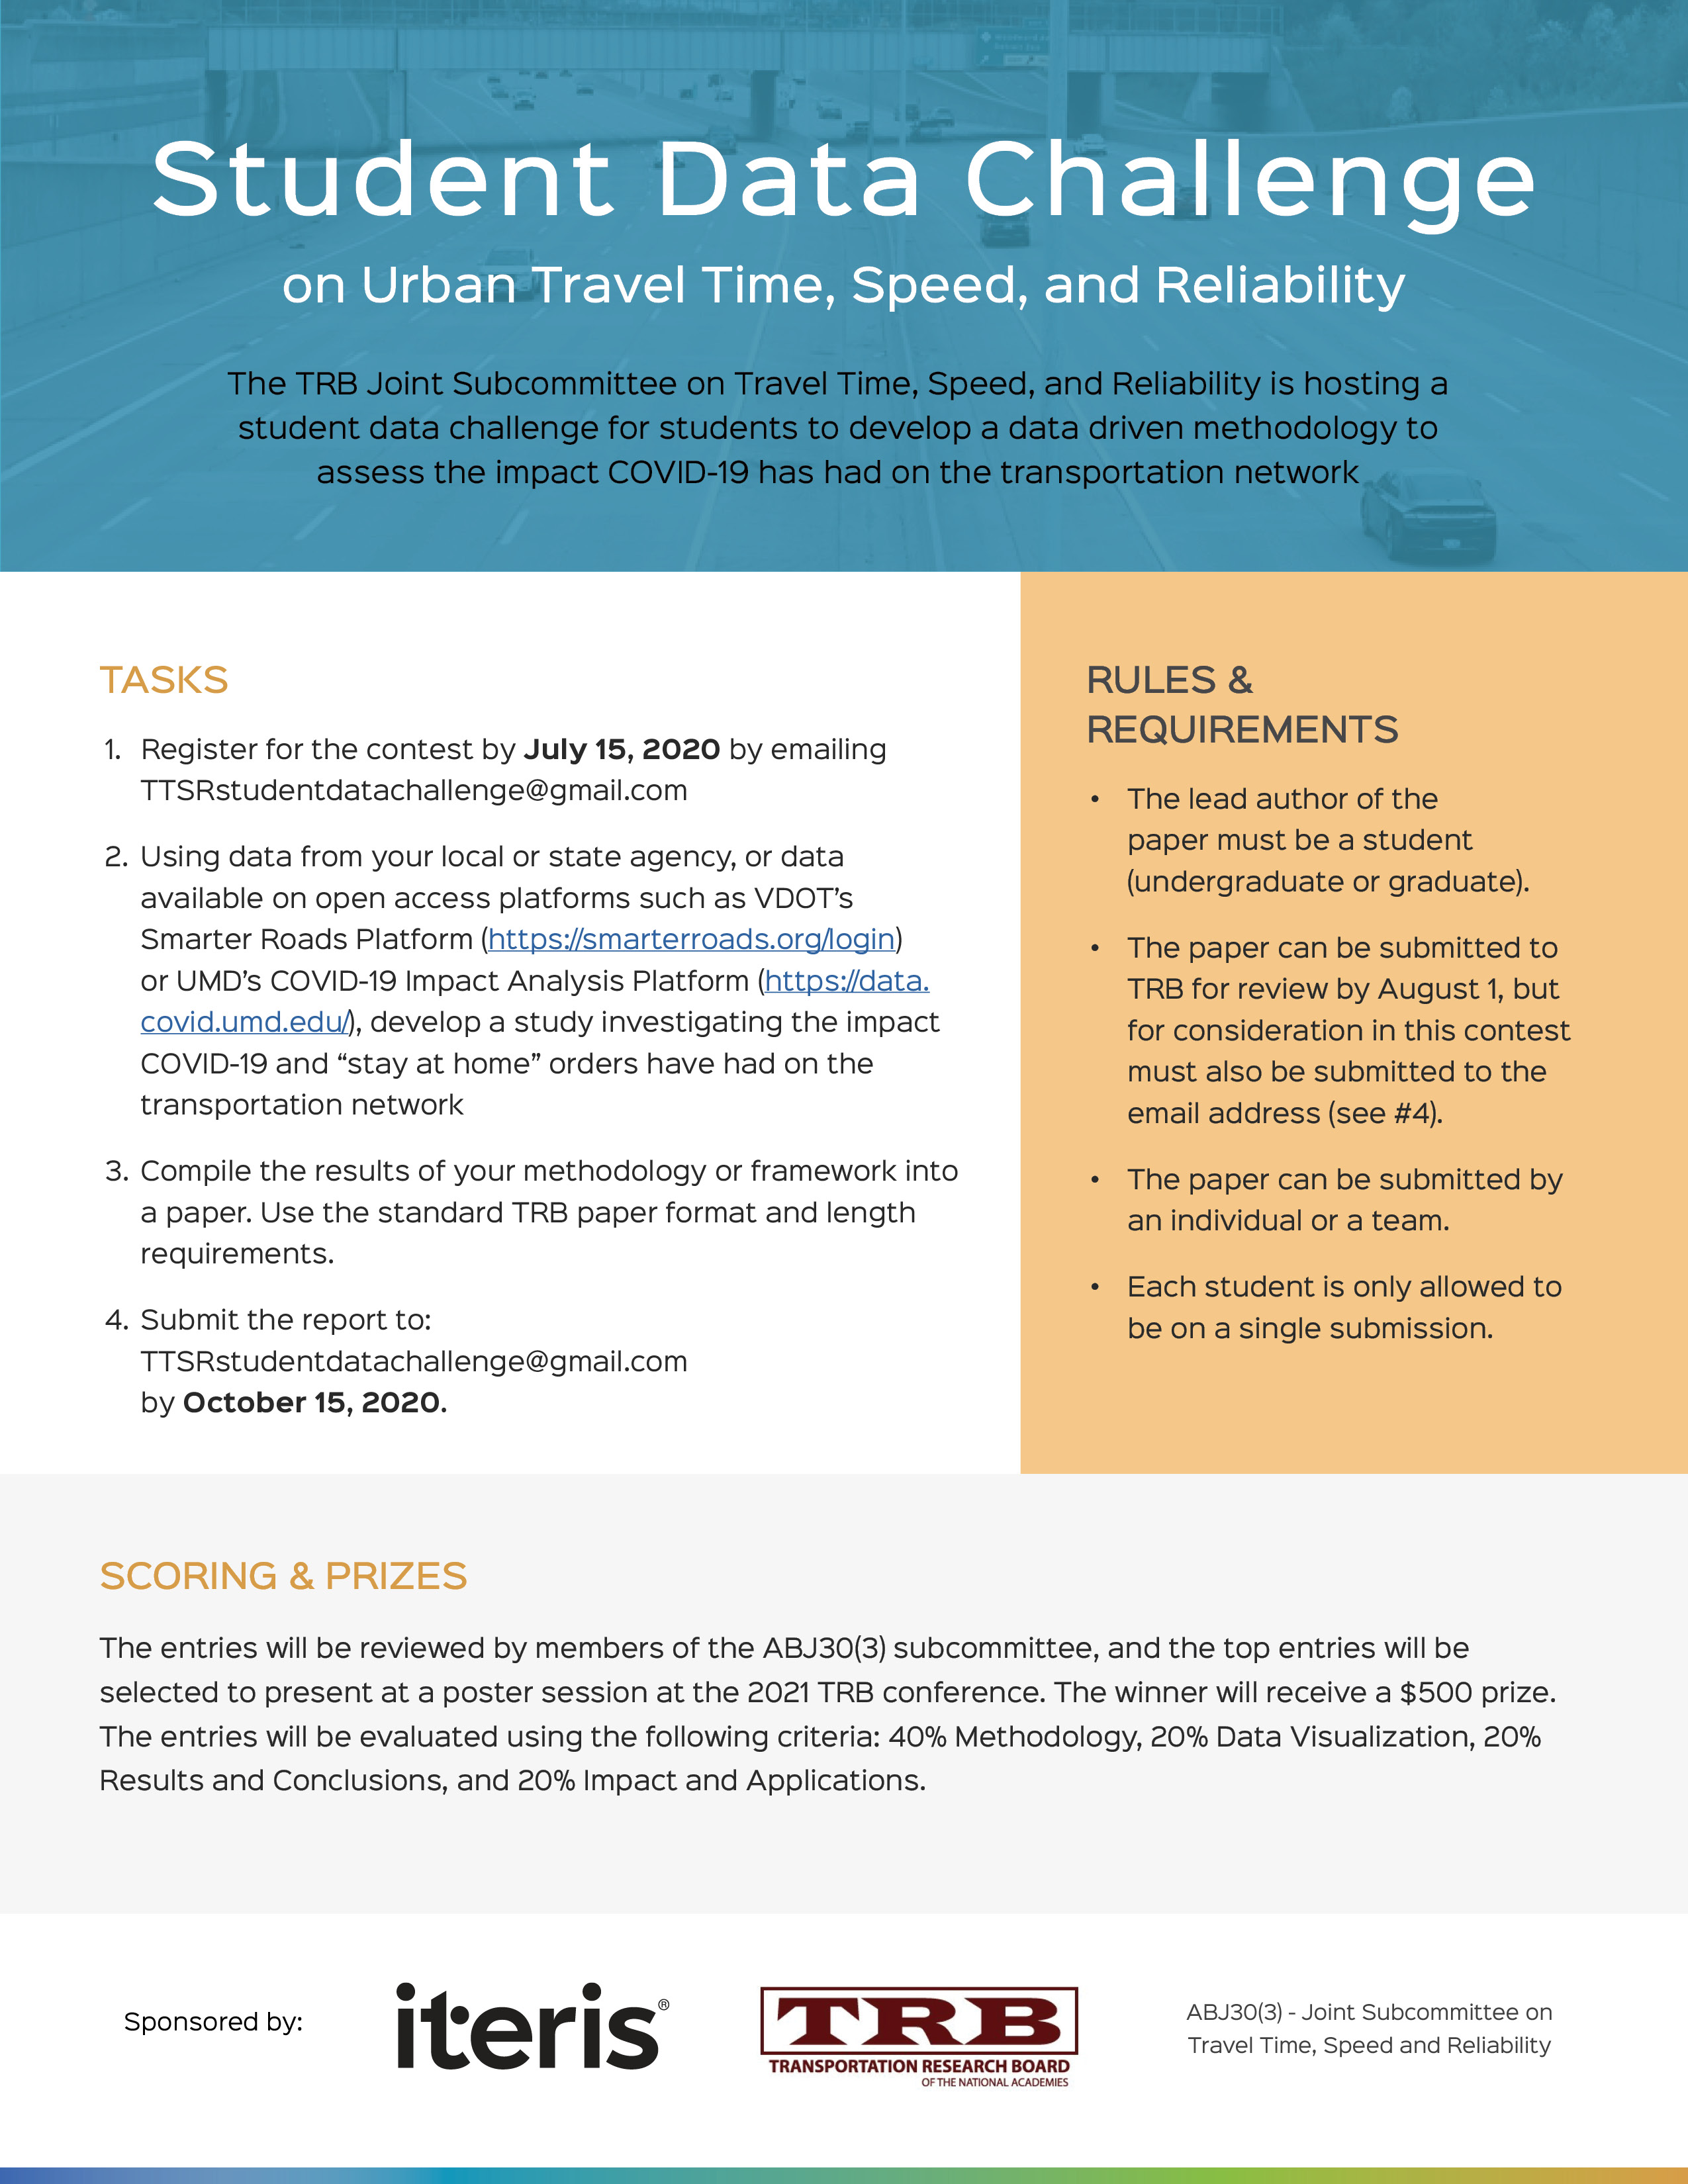 Student Data Challenge On Urban Travel Time, Speed, And Reliability